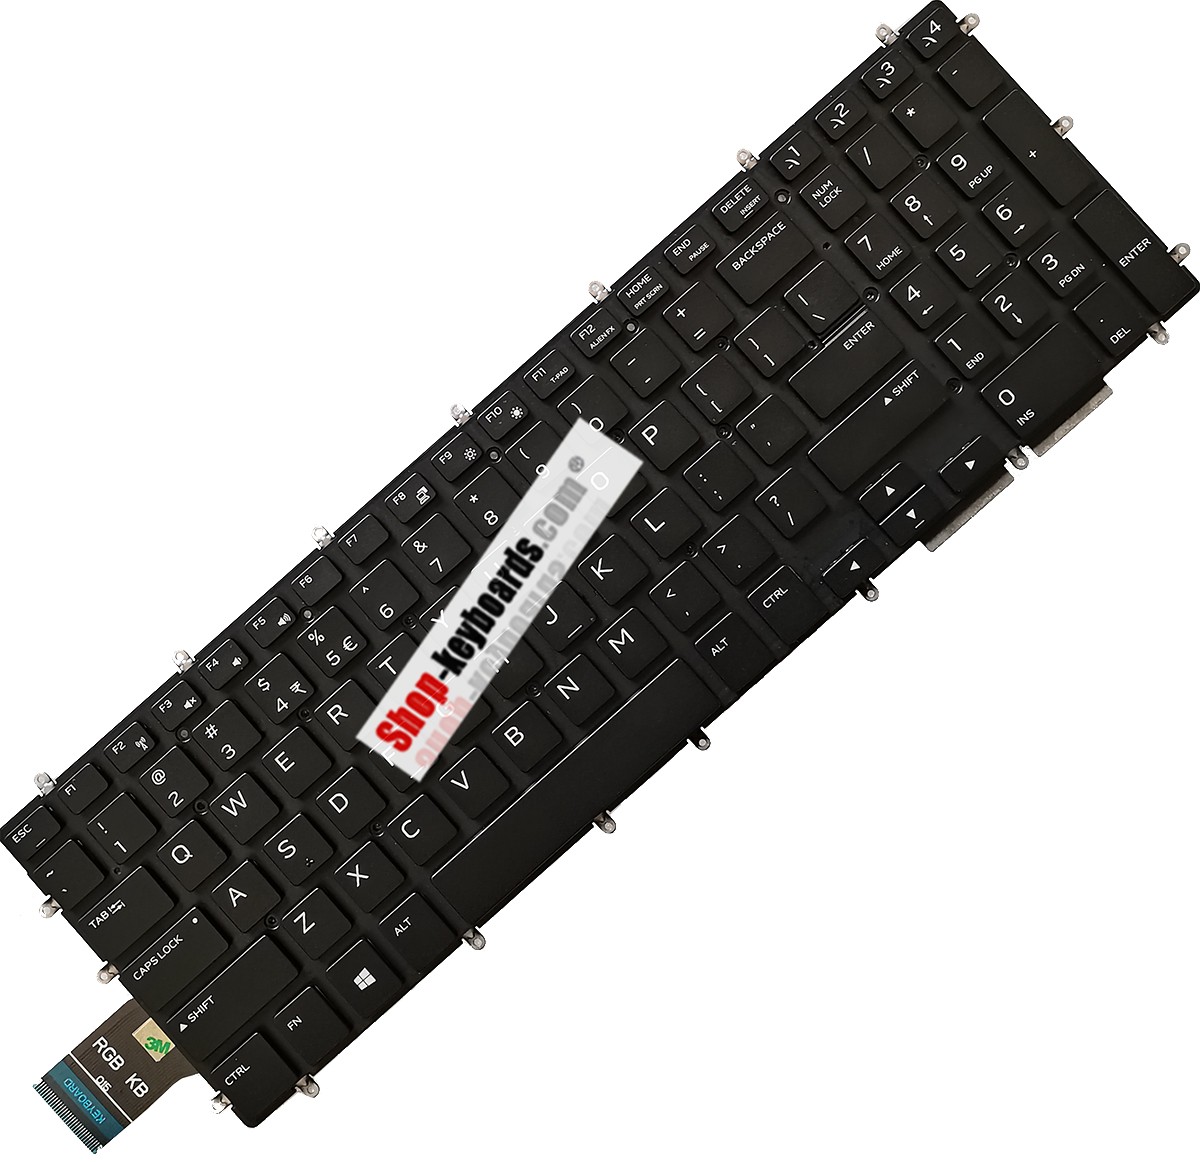 Dell AW15-6313 Keyboard replacement